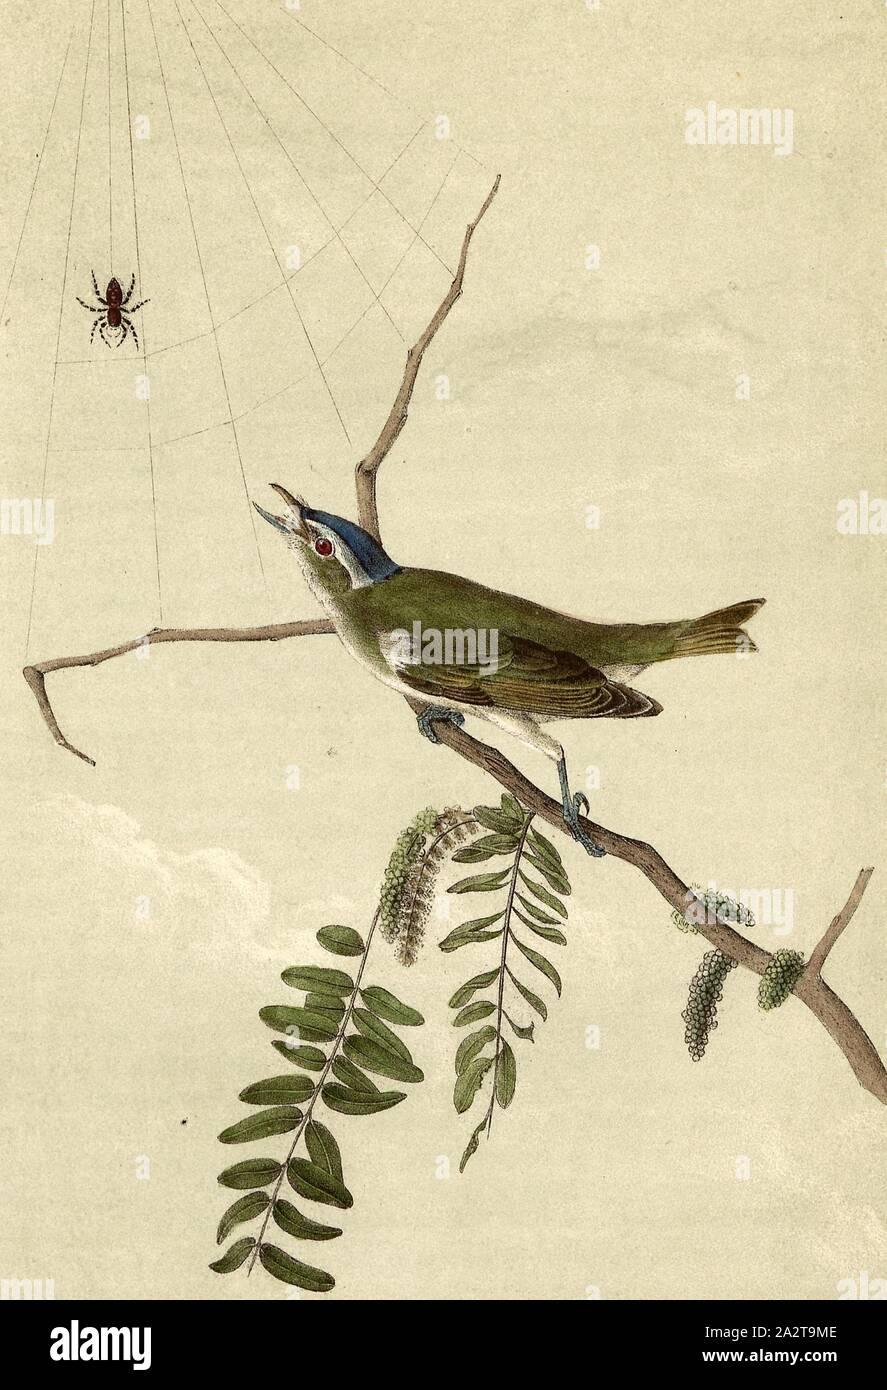 Red-eyed Vireo or Greenlet - Honey-locust, Red-eyed Vireo (Vireo olivaceus), American Stingy (Gleditsia triacanthos), Signed: J.J. Audubon, J.T. Bowen, lithograph, Pl. 243 (vol. 4), Audubon, John James (drawn); Bowen, J. T. (lith.), 1856, John James Audubon: The birds of America: from drawings made in the United States and their territories. New York: Audubon, 1856 Stock Photo